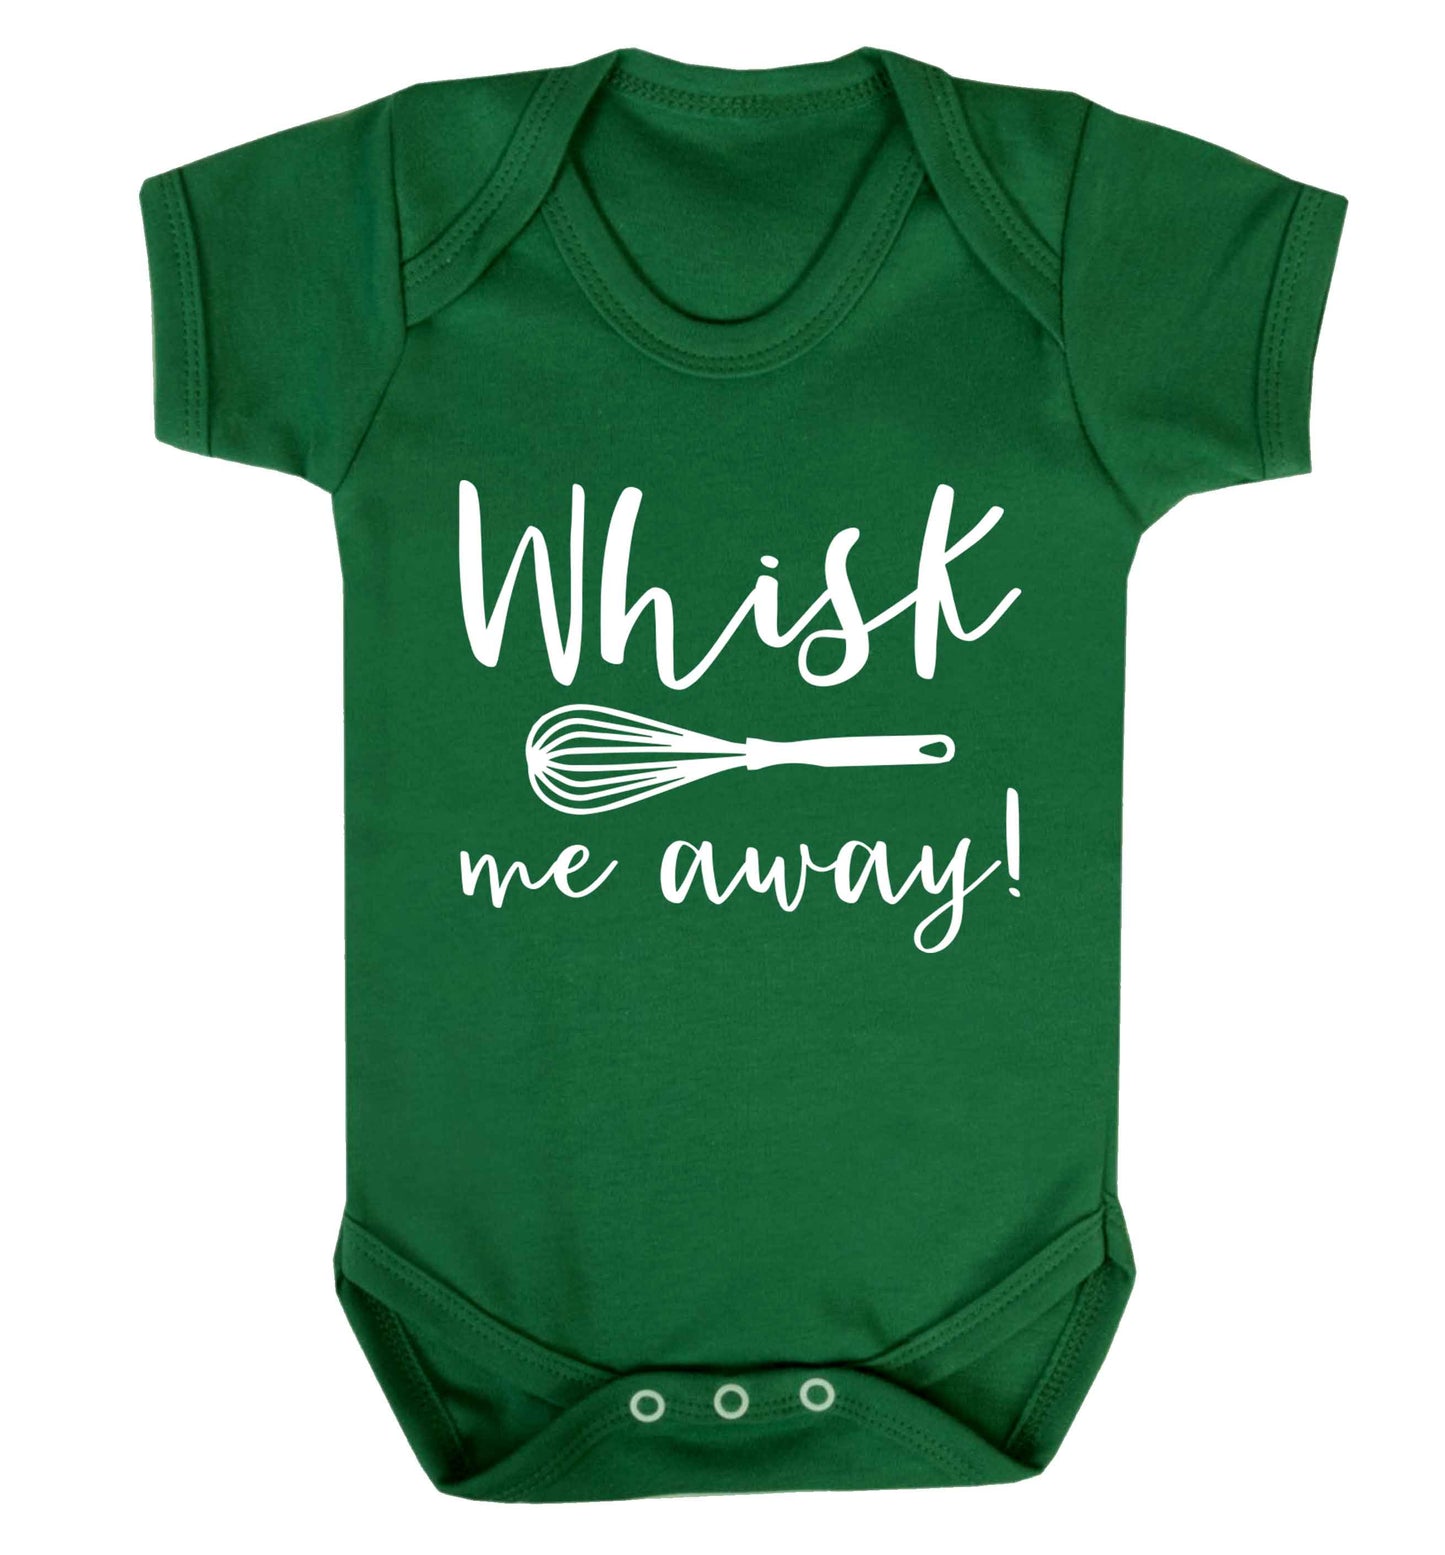 Whisk me away Baby Vest green 18-24 months